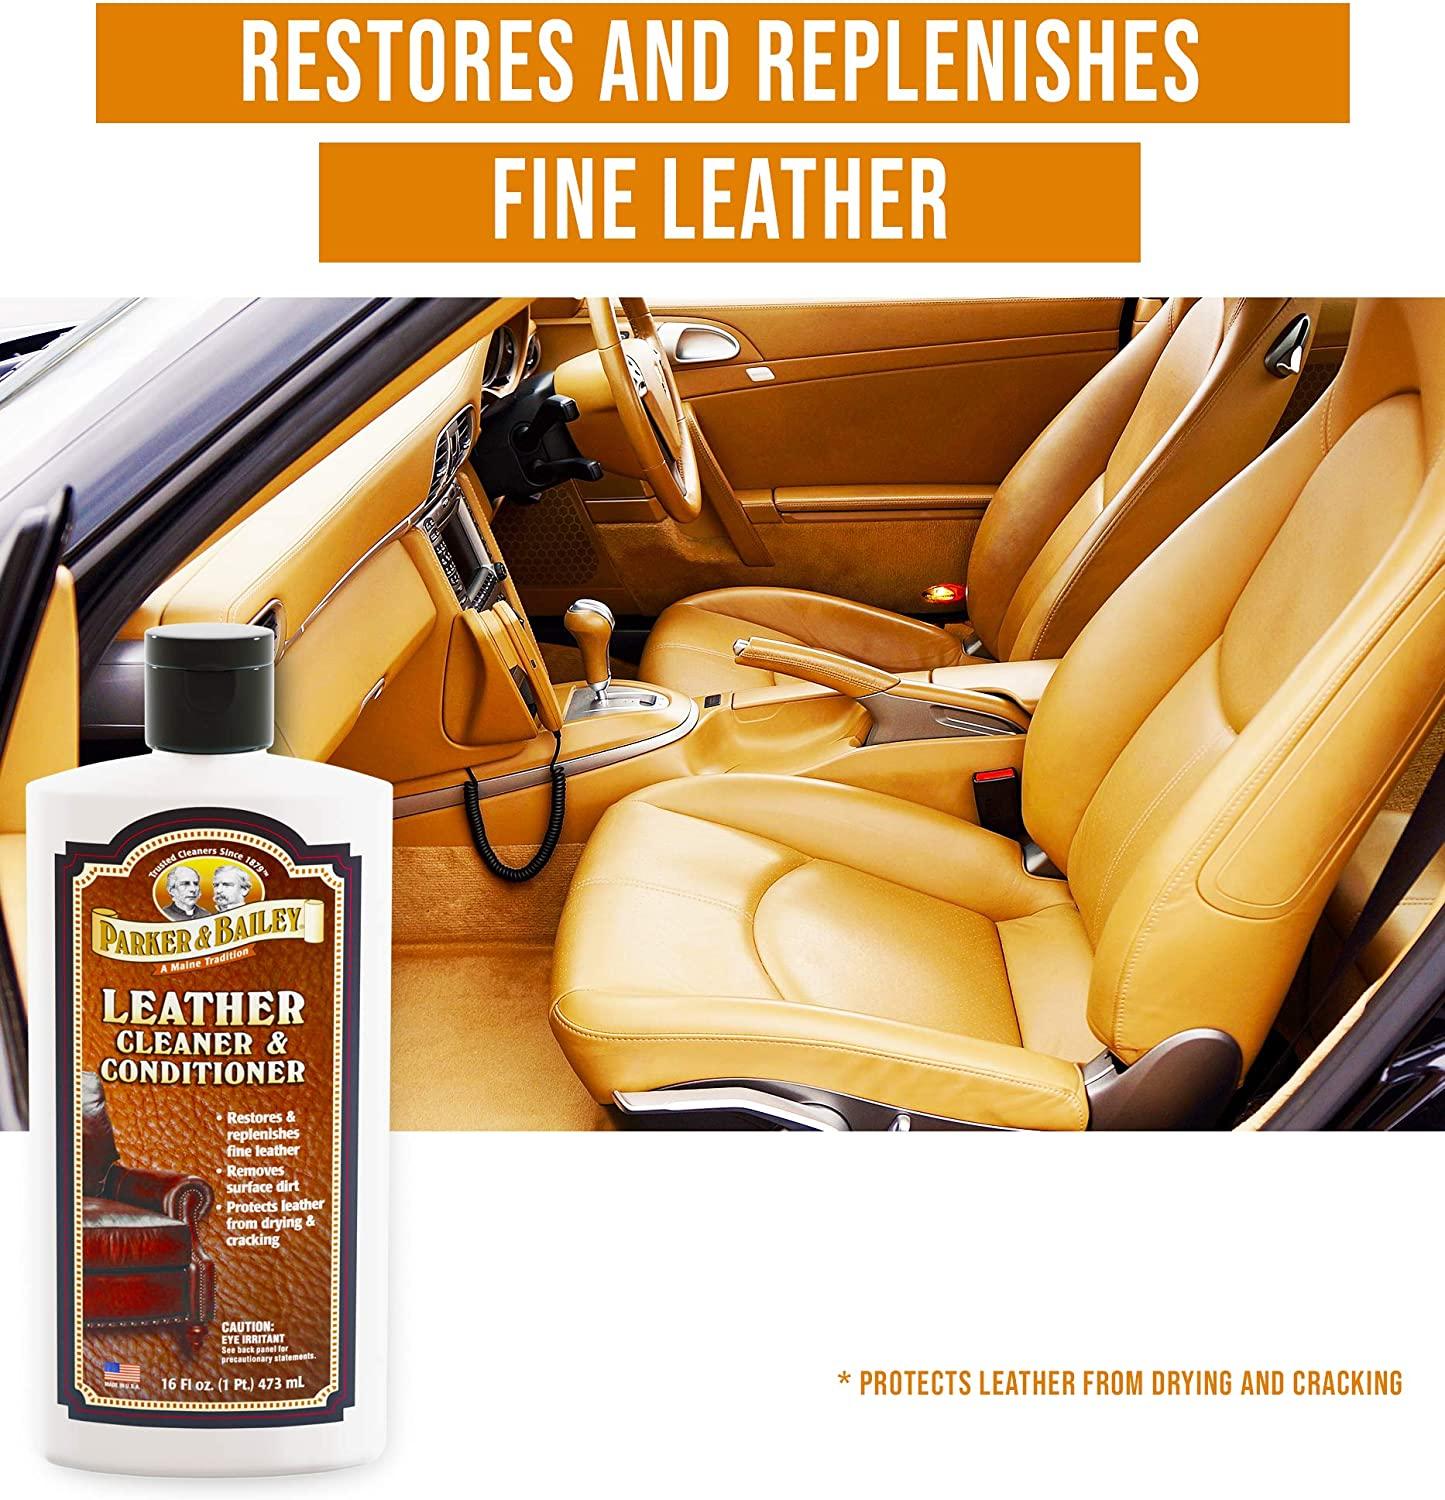 Parker Bailey Leather Cleaner and Conditioner - Leather Conditioner Shoes - Car  Leather Cleaner - Cleans and Conditions Leather Furniture, Boots, Handbags  - 16oz